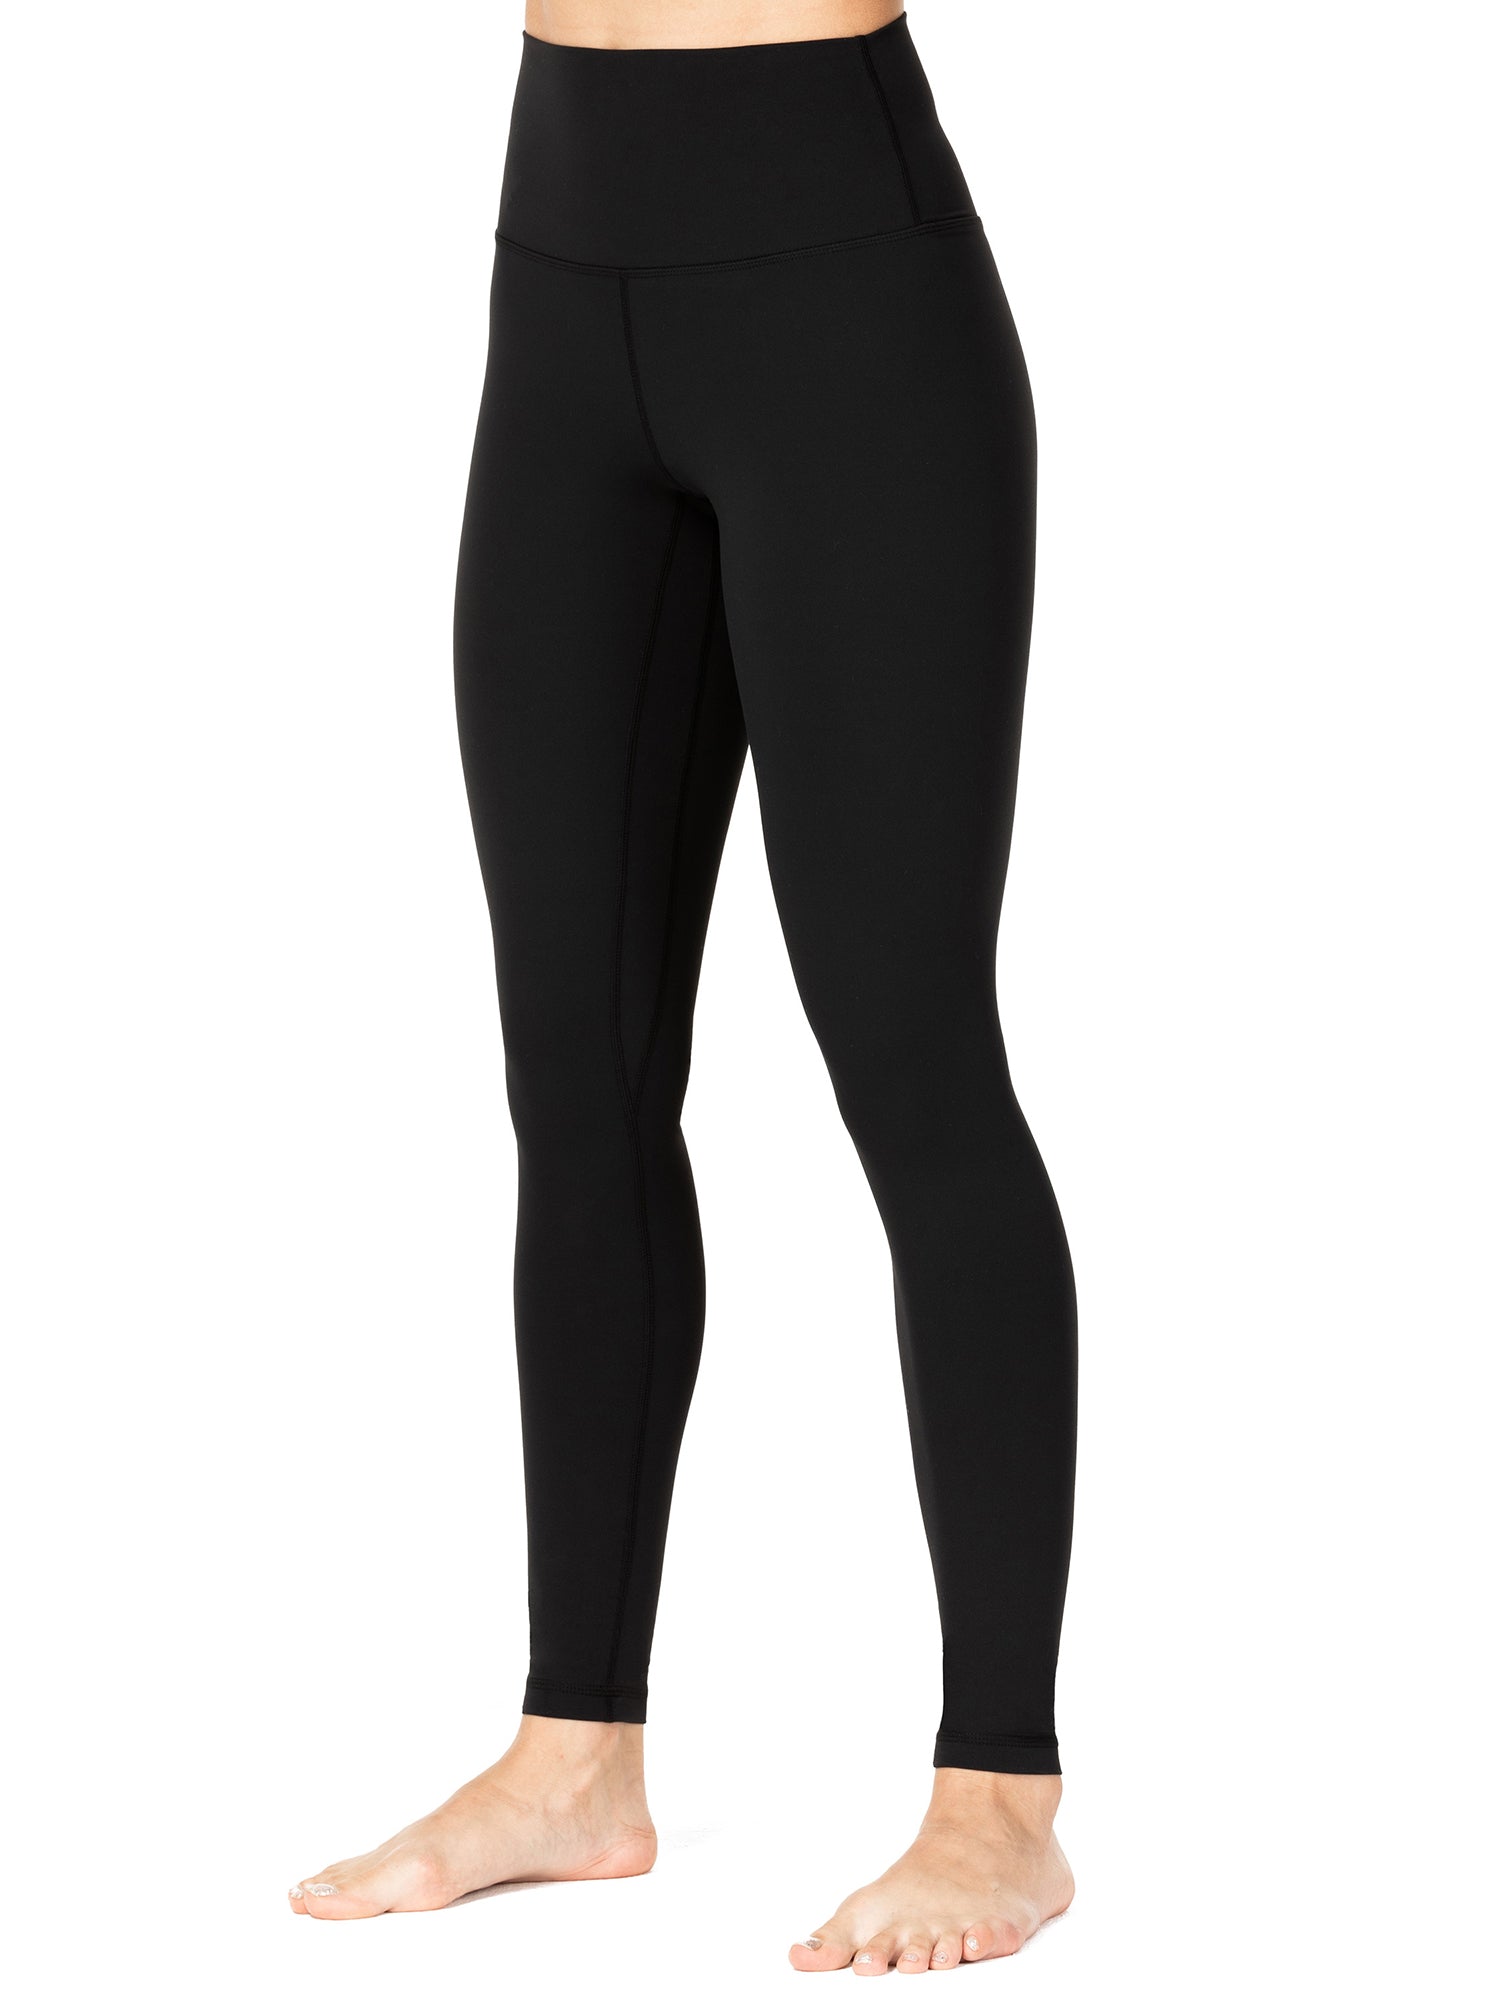 Sunzel Workout Leggings for Women, Squat Proof High Waisted - Import It All